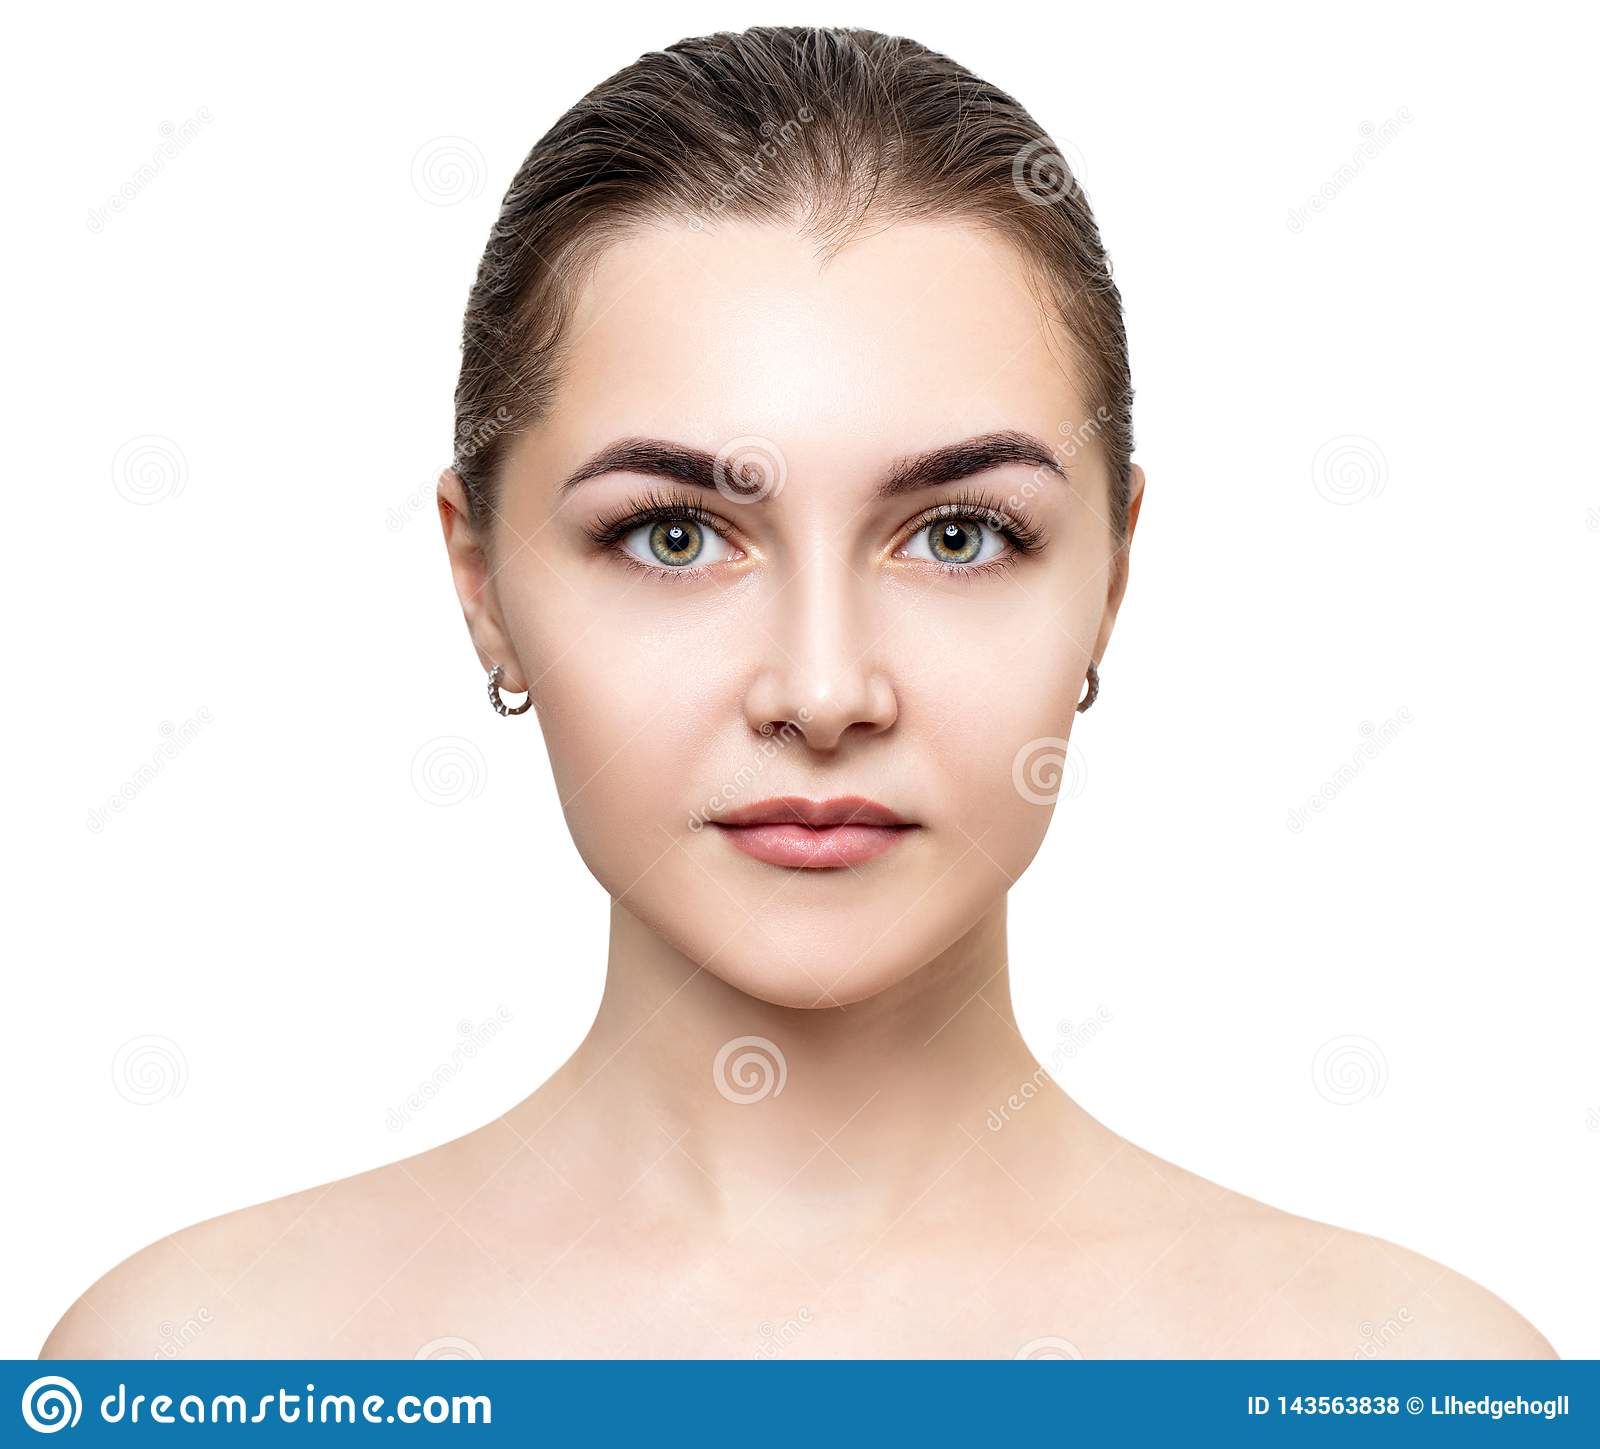 Female Face Pictures